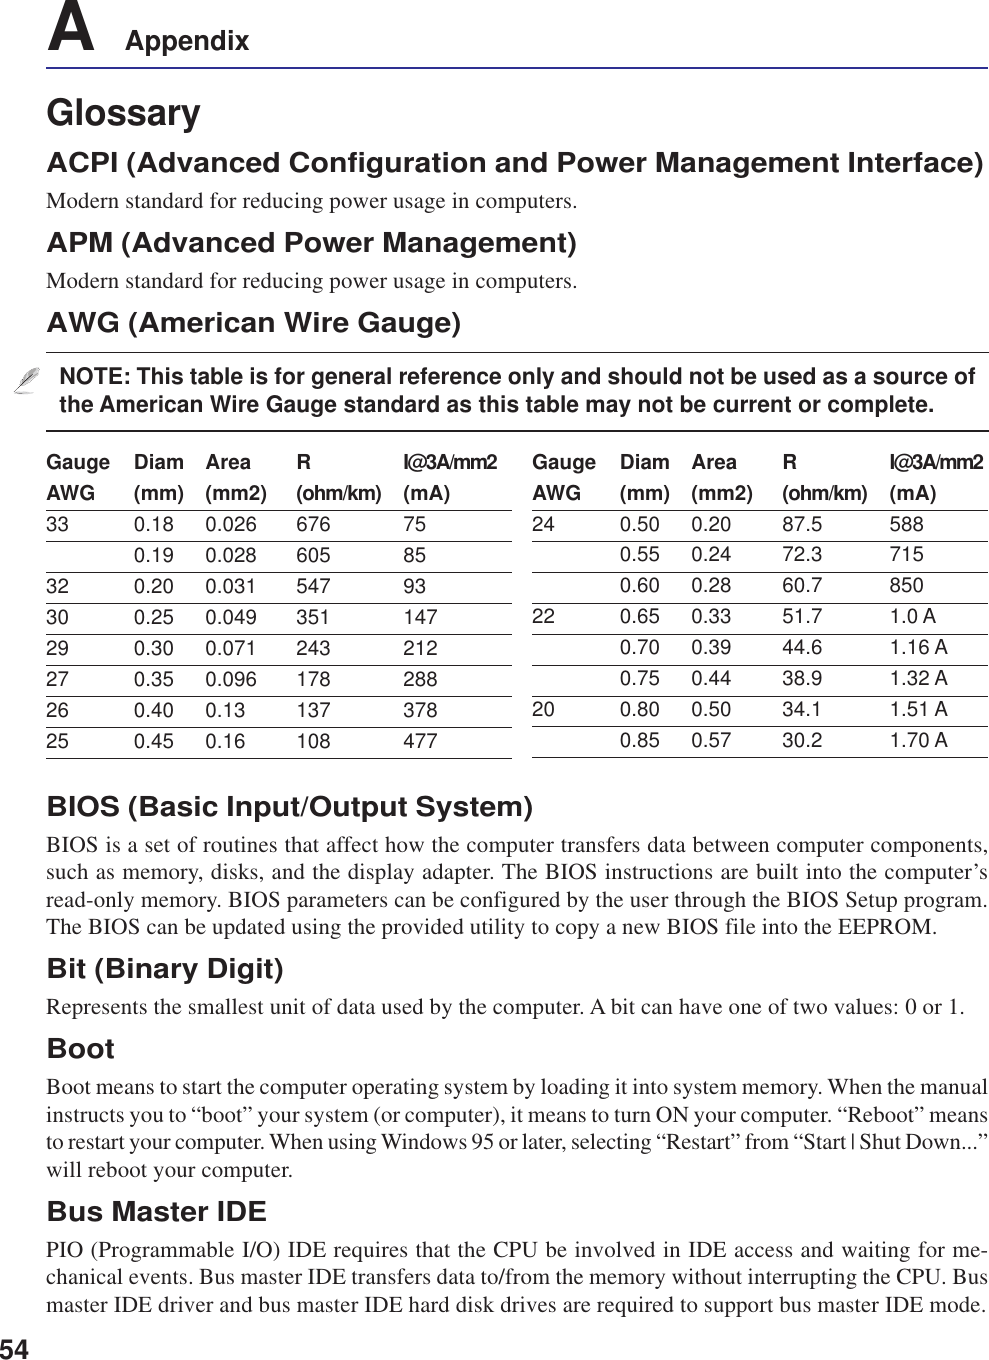 54A    AppendixGlossaryACPI (Advanced Configuration and Power Management Interface)Modern standard for reducing power usage in computers.APM (Advanced Power Management)Modern standard for reducing power usage in computers.AWG (American Wire Gauge)NOTE: This table is for general reference only and should not be used as a source ofthe American Wire Gauge standard as this table may not be current or complete.Gauge Diam Area R I@3A/mm2AWG (mm) (mm2) (ohm/km) (mA)33 0.18 0.026 676 750.19 0.028 605 8532 0.20 0.031 547 9330 0.25 0.049 351 14729 0.30 0.071 243 21227 0.35 0.096 178 28826 0.40 0.13 137 37825 0.45 0.16 108 477Gauge Diam Area R I@3A/mm2AWG (mm) (mm2) (ohm/km) (mA)24 0.50 0.20 87.5 5880.55 0.24 72.3 7150.60 0.28 60.7 85022 0.65 0.33 51.7 1.0 A0.70 0.39 44.6 1.16 A0.75 0.44 38.9 1.32 A20 0.80 0.50 34.1 1.51 A0.85 0.57 30.2 1.70 ABIOS (Basic Input/Output System)BIOS is a set of routines that affect how the computer transfers data between computer components,such as memory, disks, and the display adapter. The BIOS instructions are built into the computer’sread-only memory. BIOS parameters can be configured by the user through the BIOS Setup program.The BIOS can be updated using the provided utility to copy a new BIOS file into the EEPROM.Bit (Binary Digit)Represents the smallest unit of data used by the computer. A bit can have one of two values: 0 or 1.BootBoot means to start the computer operating system by loading it into system memory. When the manualinstructs you to “boot” your system (or computer), it means to turn ON your computer. “Reboot” meansto restart your computer. When using Windows 95 or later, selecting “Restart” from “Start | Shut Down...”will reboot your computer.Bus Master IDEPIO (Programmable I/O) IDE requires that the CPU be involved in IDE access and waiting for me-chanical events. Bus master IDE transfers data to/from the memory without interrupting the CPU. Busmaster IDE driver and bus master IDE hard disk drives are required to support bus master IDE mode.